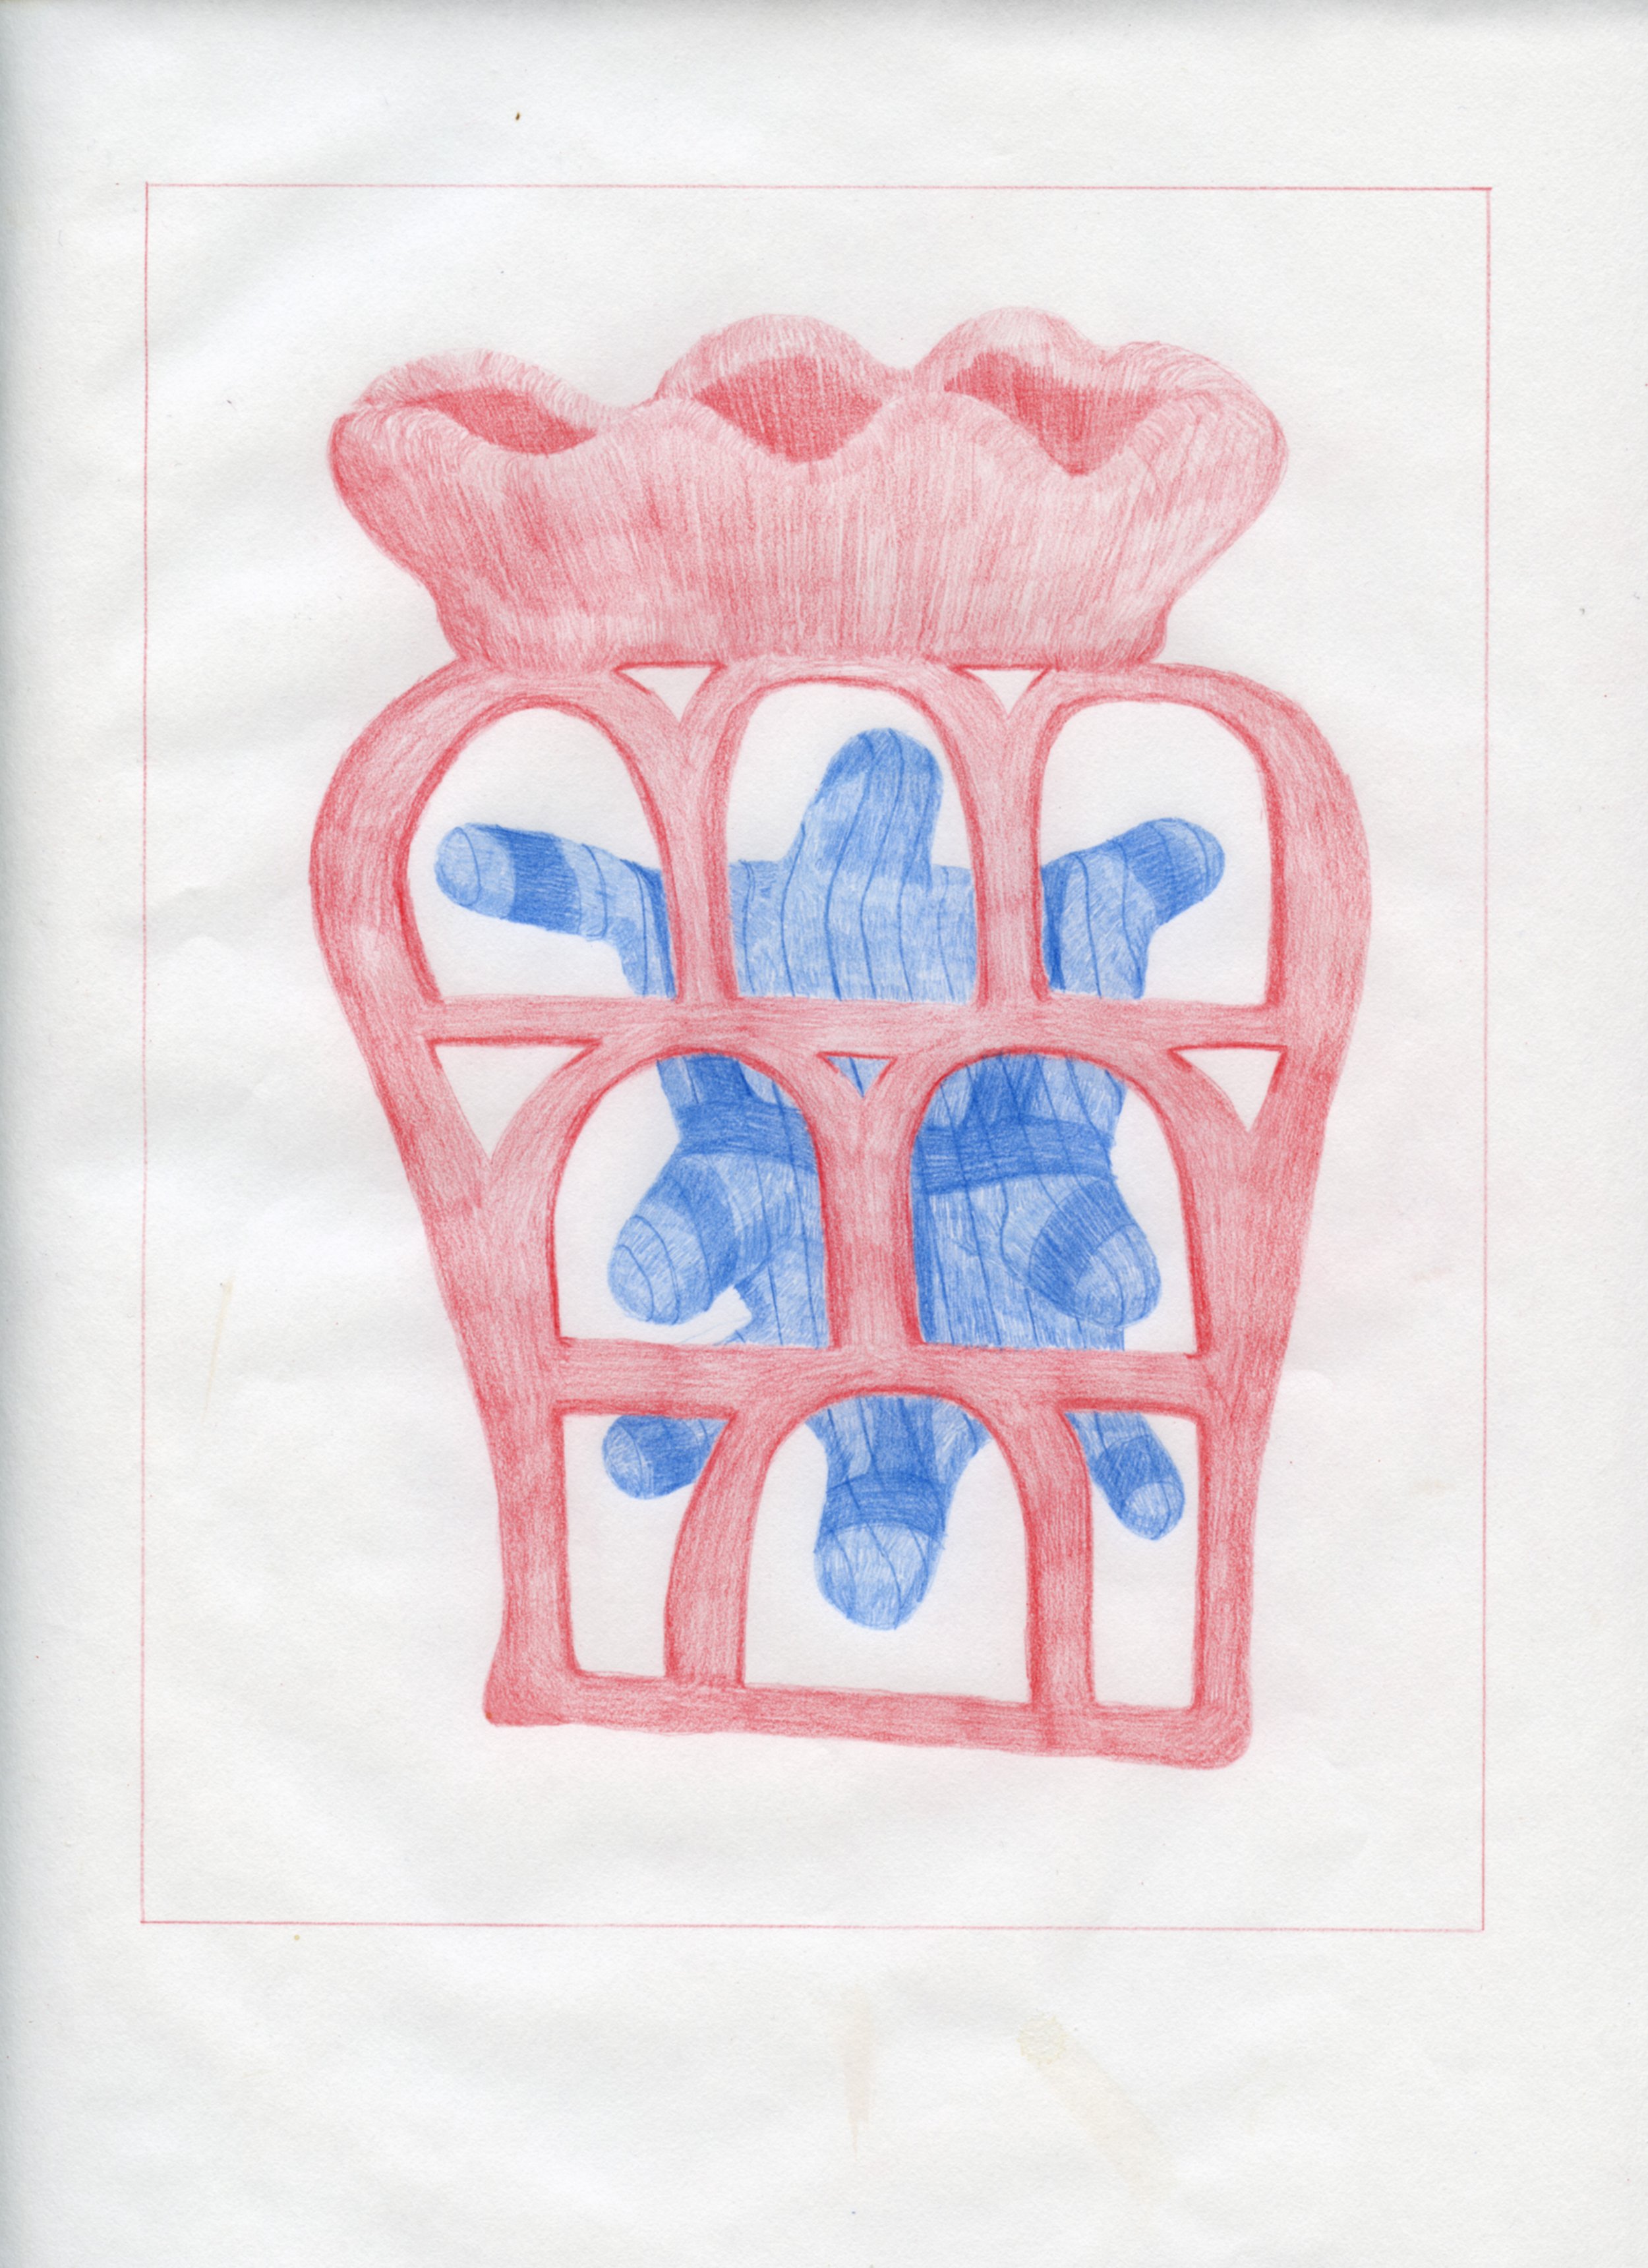  Workplace Drawing #35, 2021, Red and Blue Graphite on Bond Paper, 9”x 12”. 